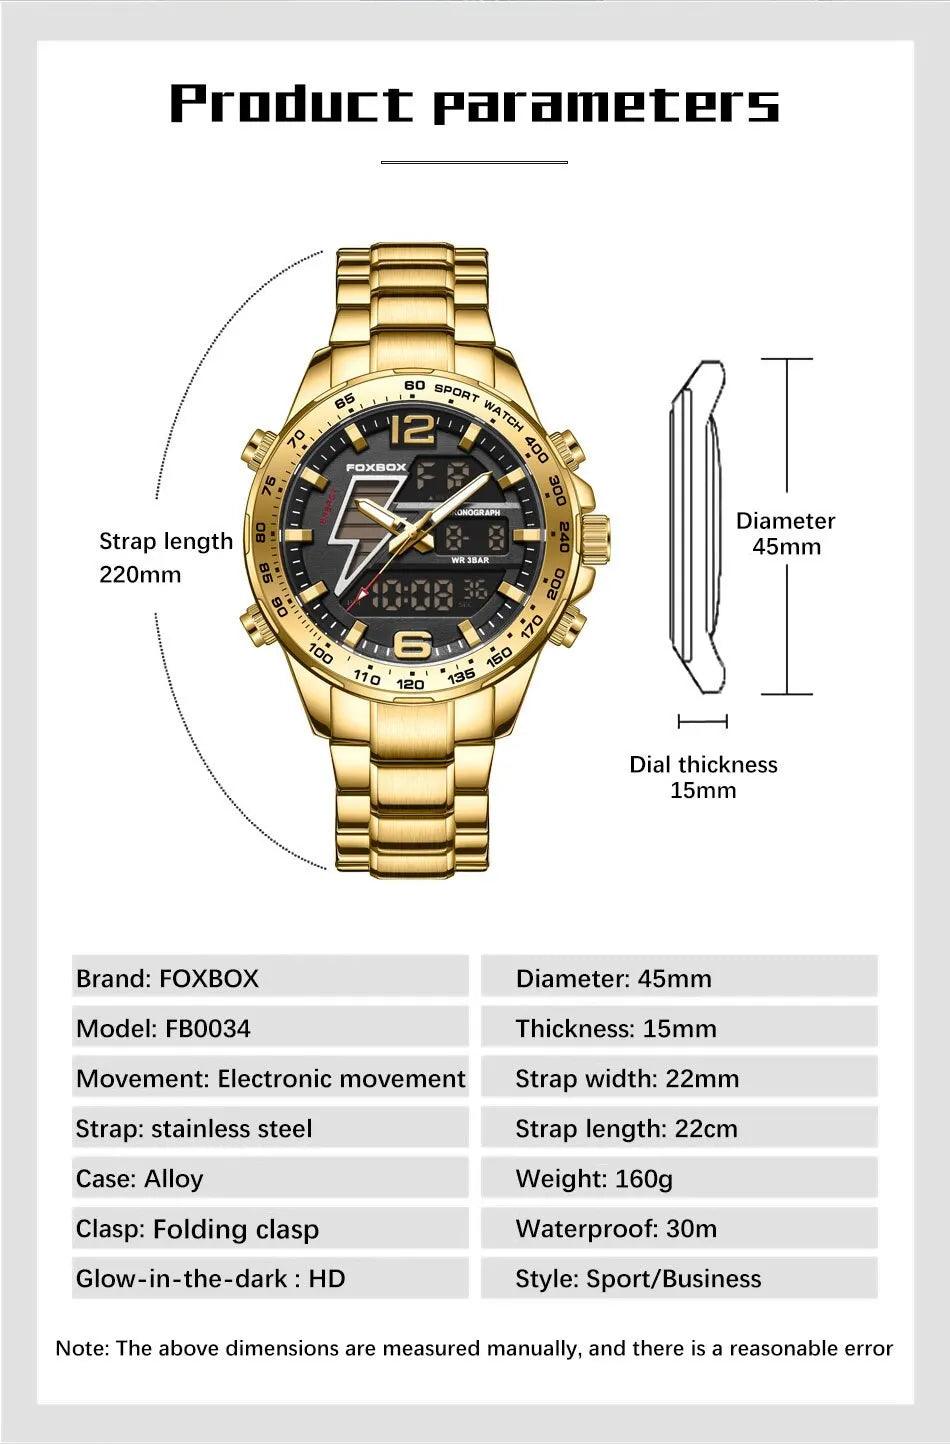 New Arrival Dual Display Top Brand Luxury Fashion Waterproof Sport Military Quartz Golden Chronograph Watches - The Jewellery Supermarket